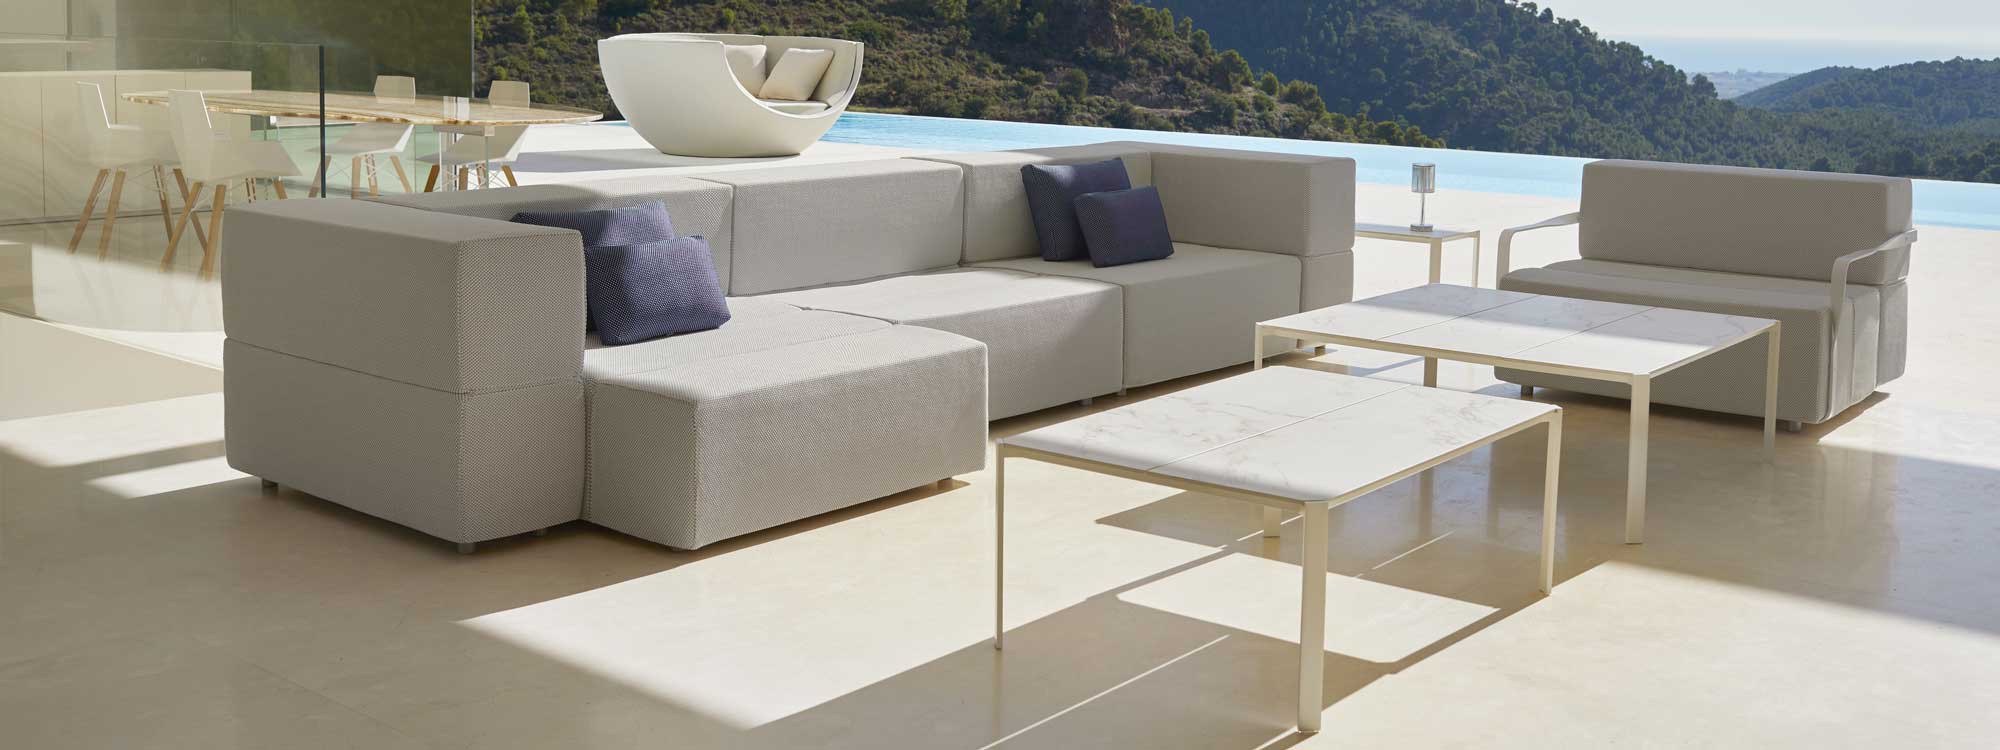 Image of Vondom Tablet modern garden sofa and lounge chair on terrace with horizon swimming pool and hills in the background